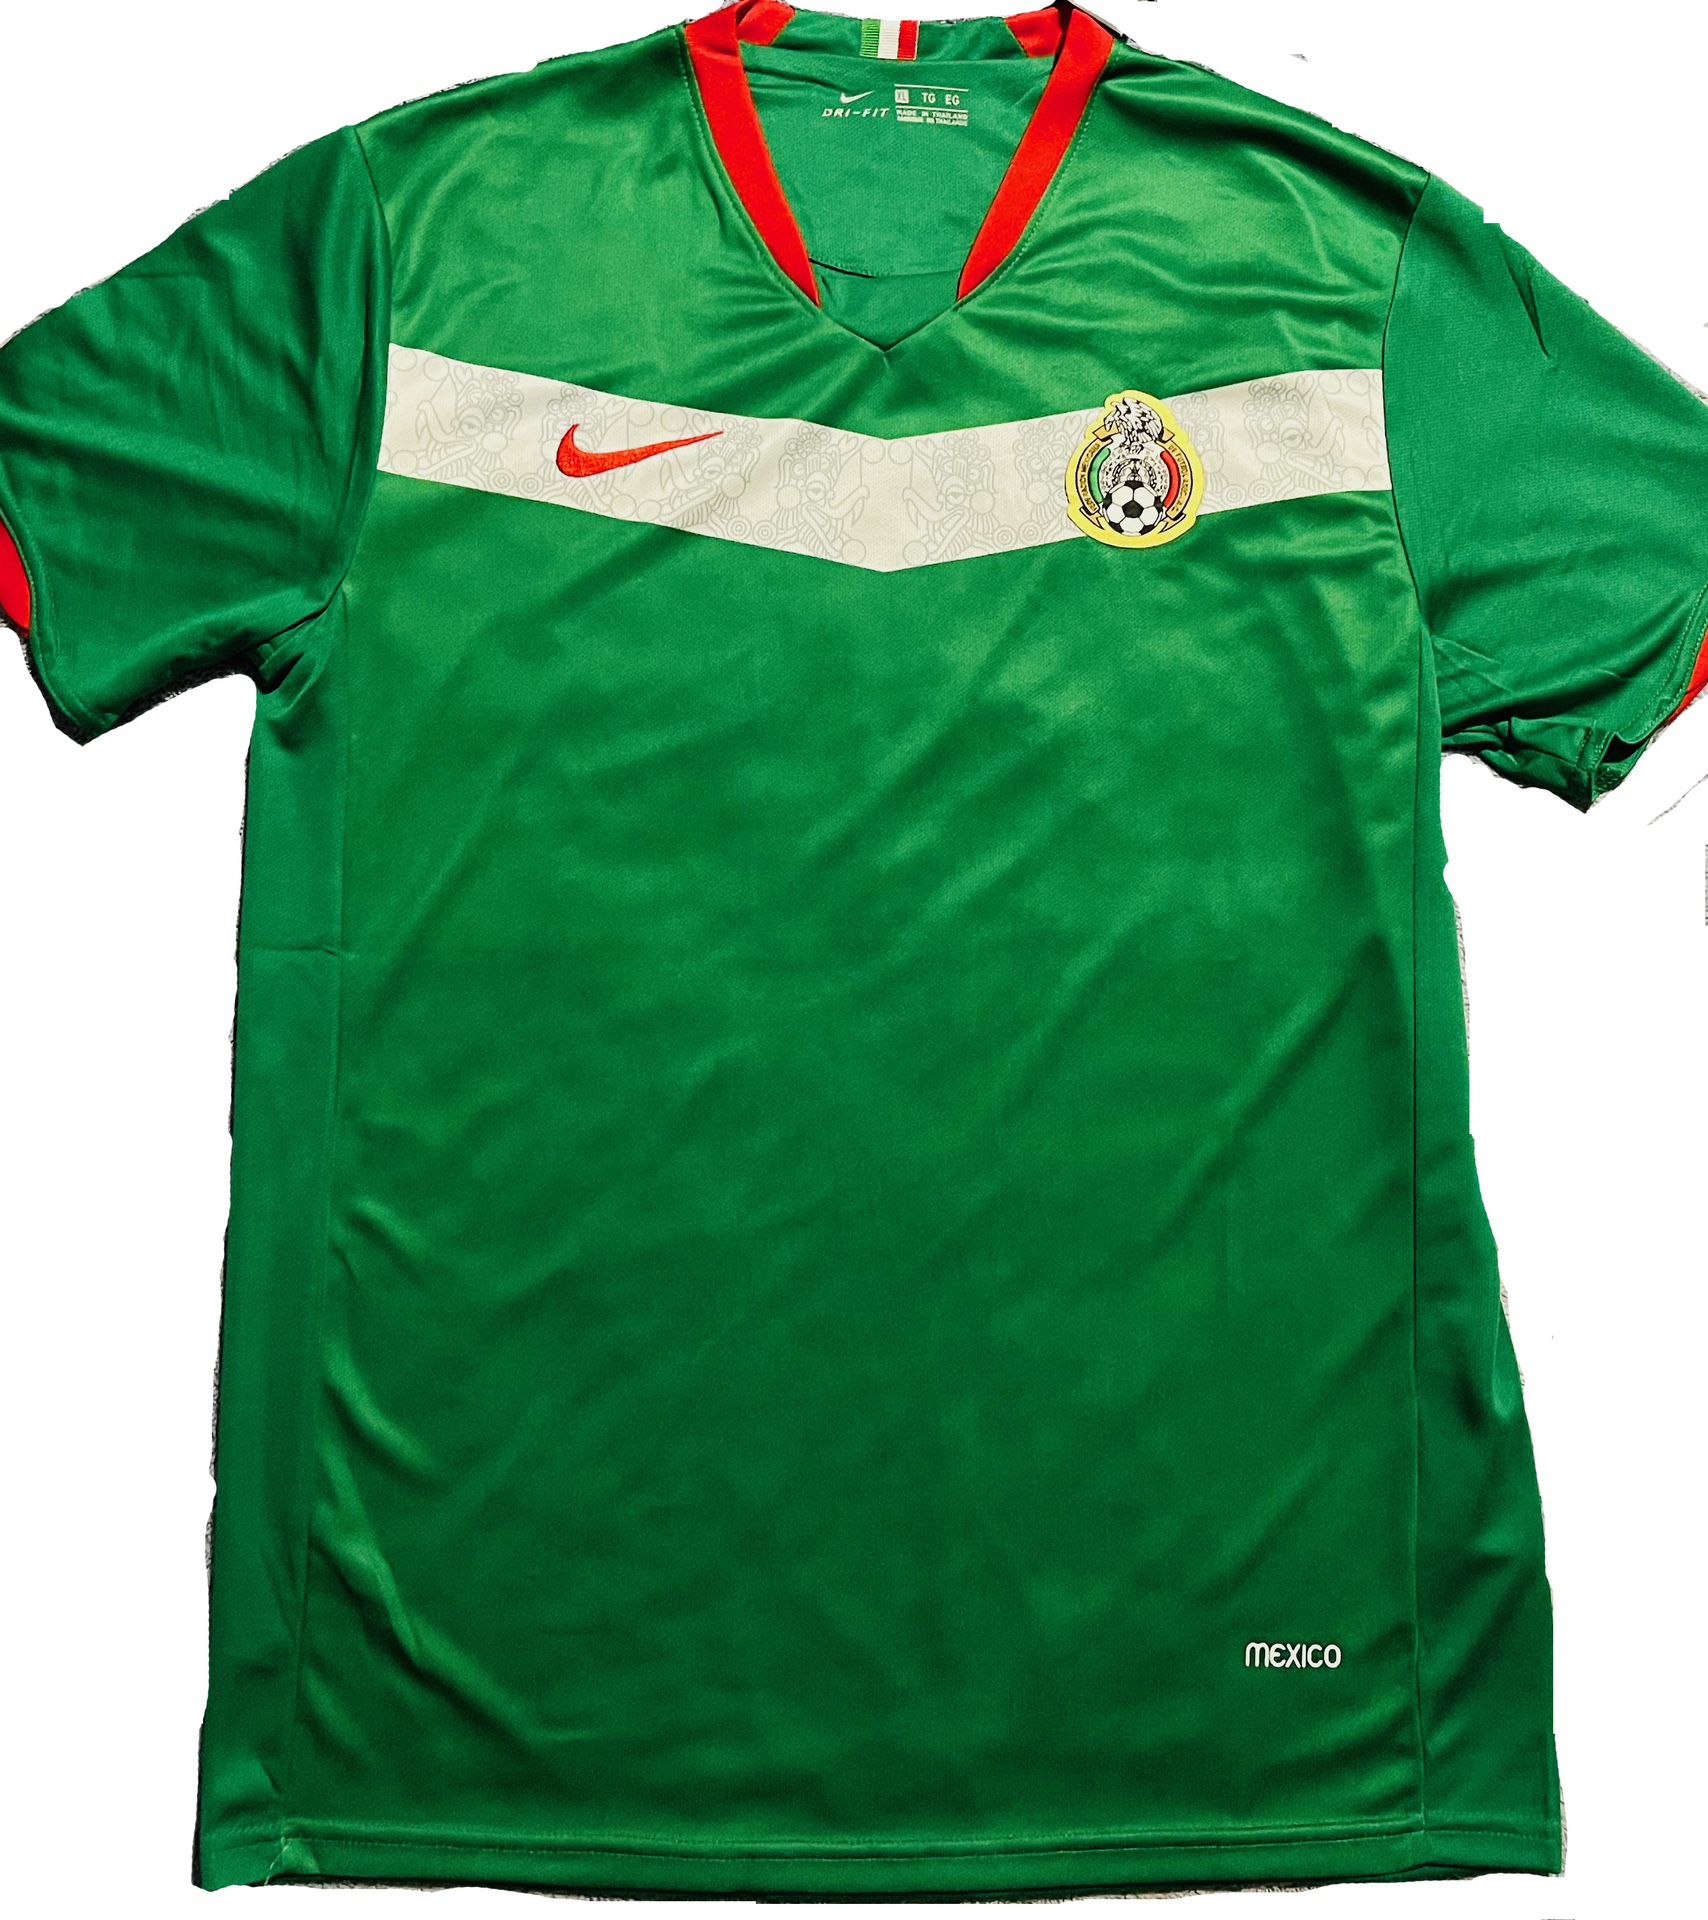 2006 Mexico Home Soccer Jersey 